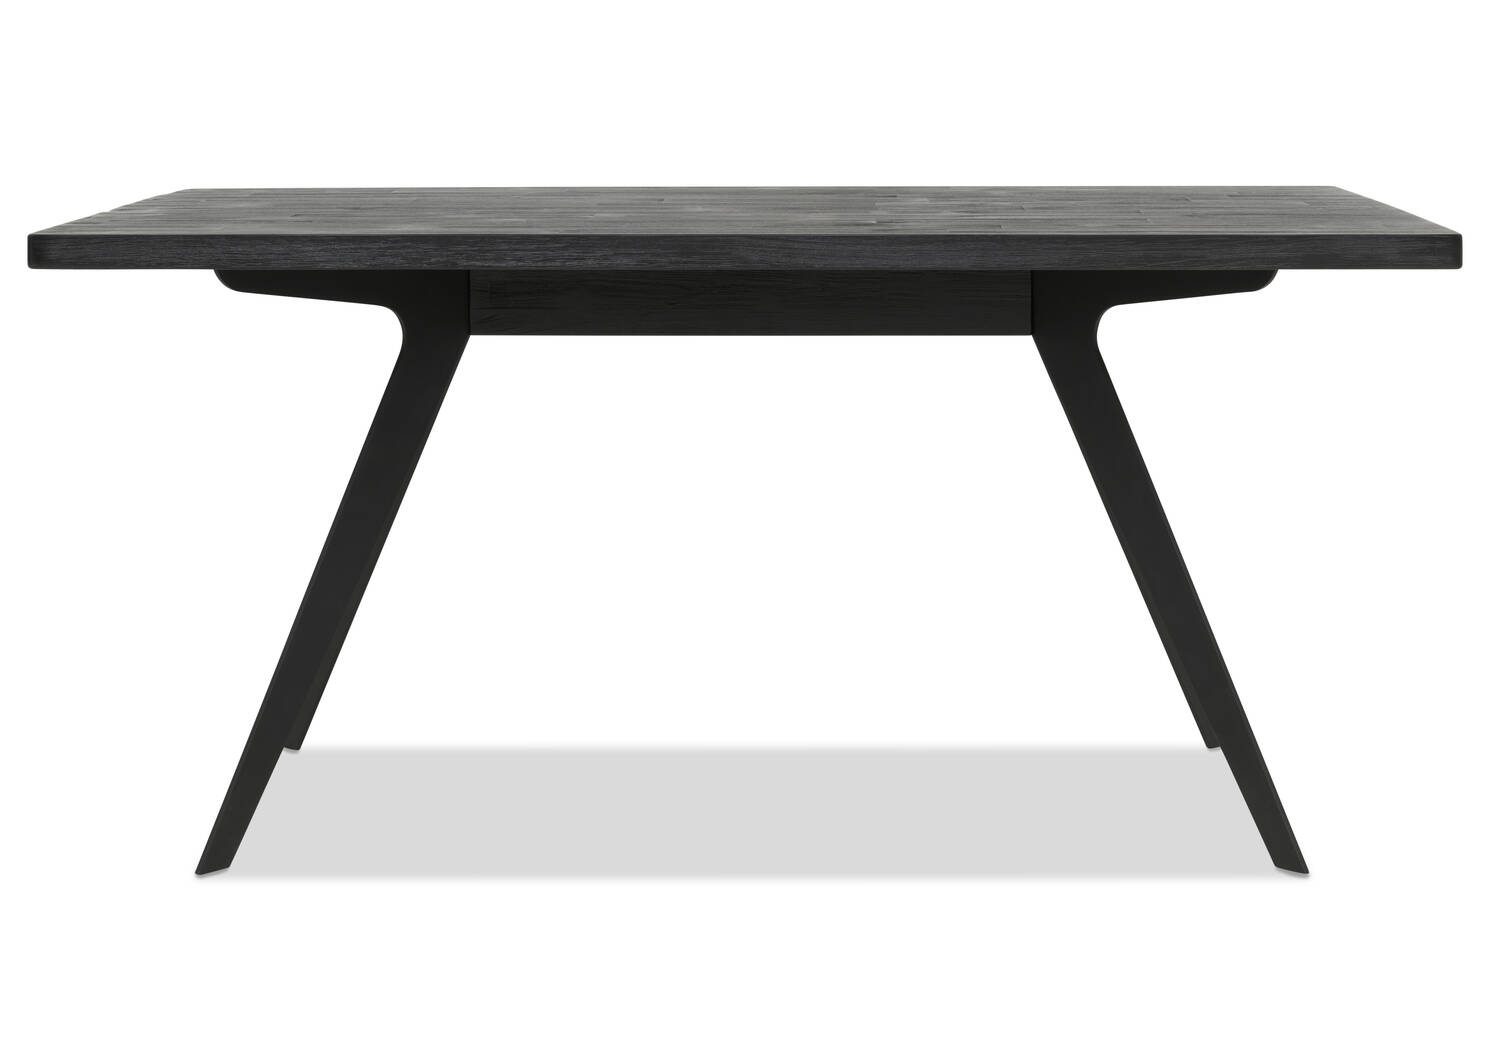 Dominion Dining Table -Bryn Coal